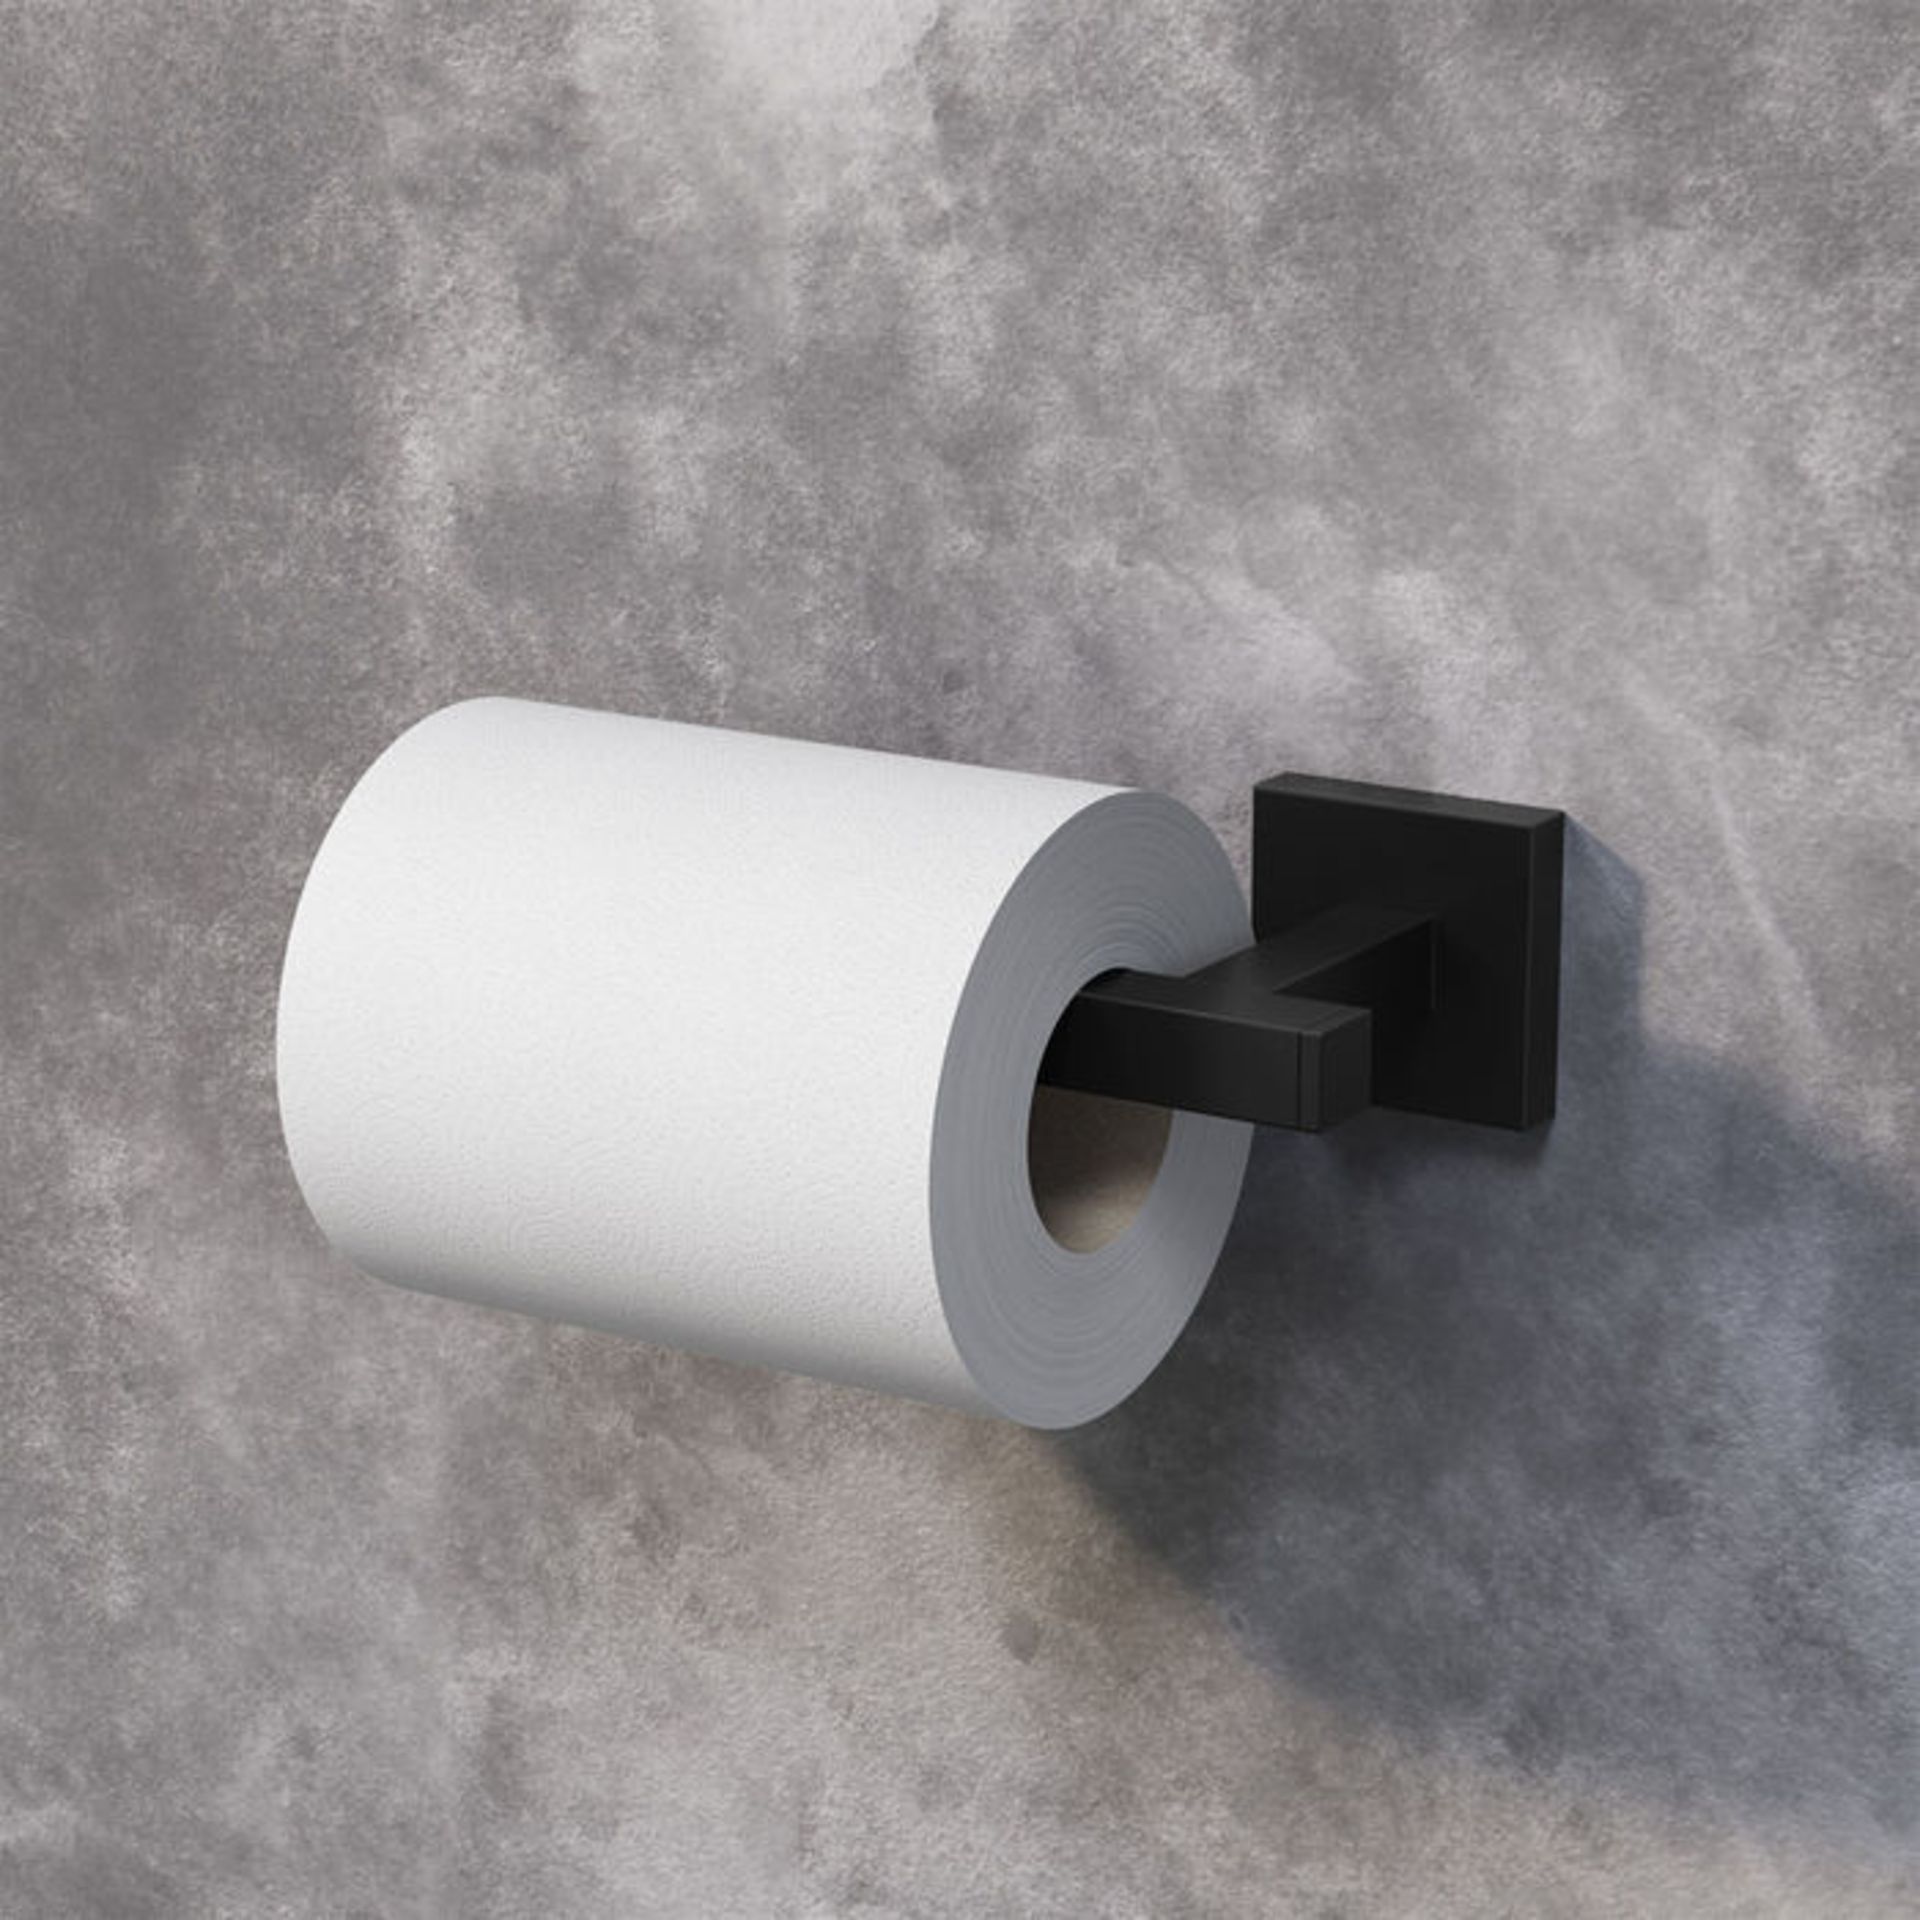 (D1002) Iker Black Toilet Roll Holder Statement aesthetic for minimalist appeal Luxurious, co... - Image 3 of 3